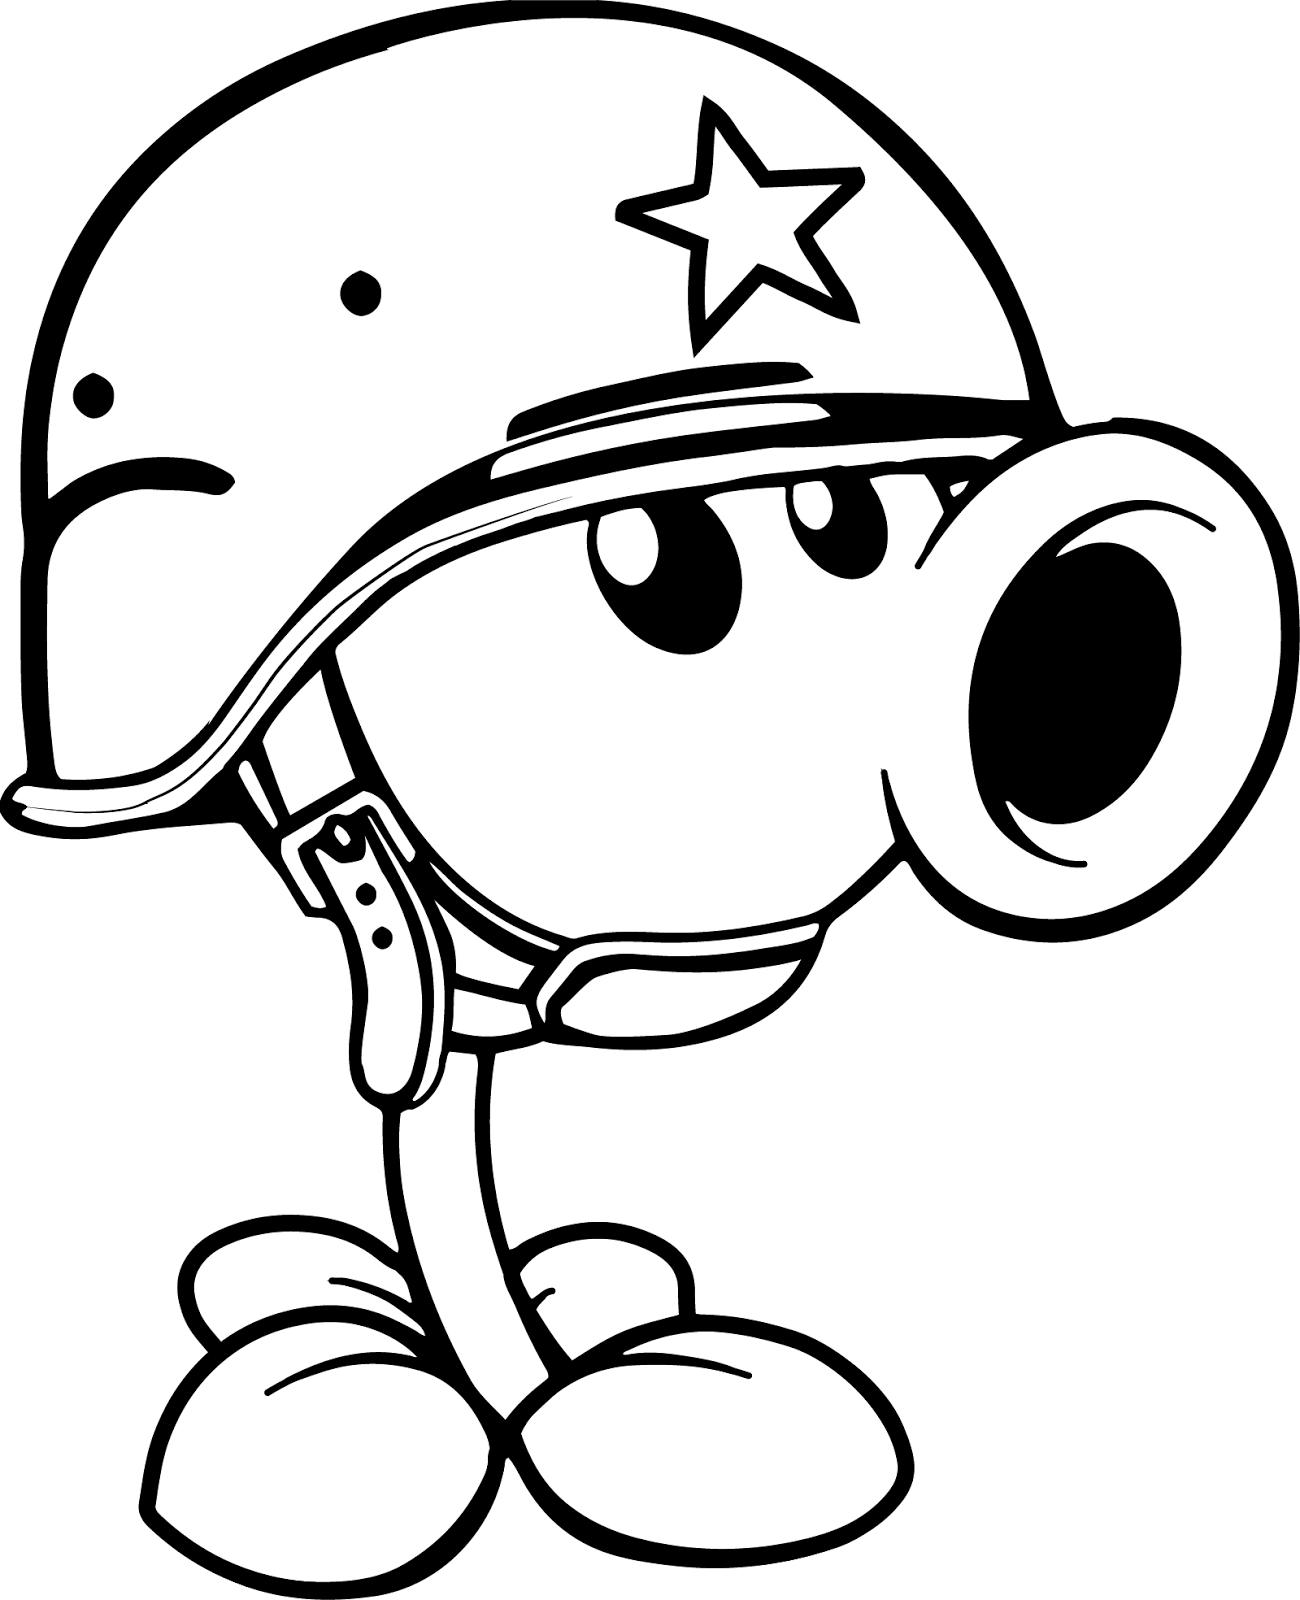 Plants Vs Zombies Coloring Pages Free Coloring Pages Plant Zombie Plants Vs Zombies B